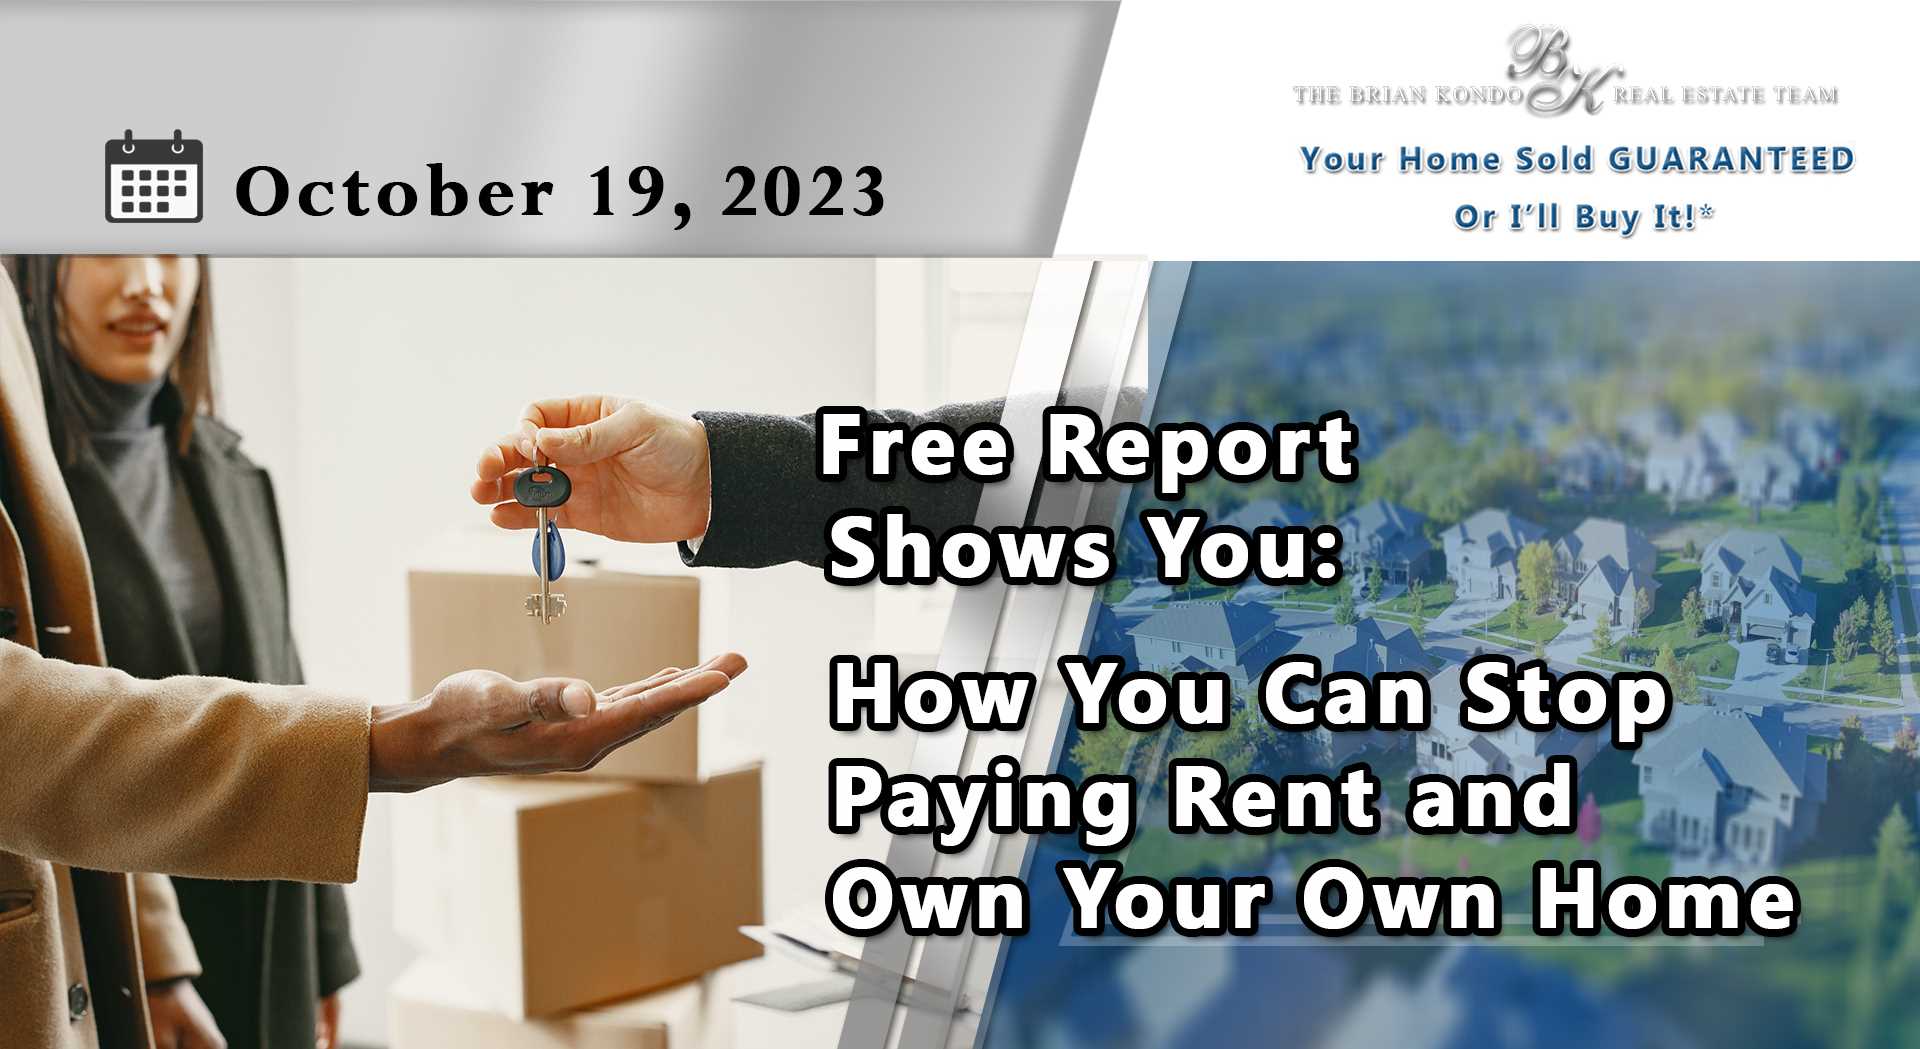 Free Report Shows You How You Can Stop Paying Rent and Own Your Own Home